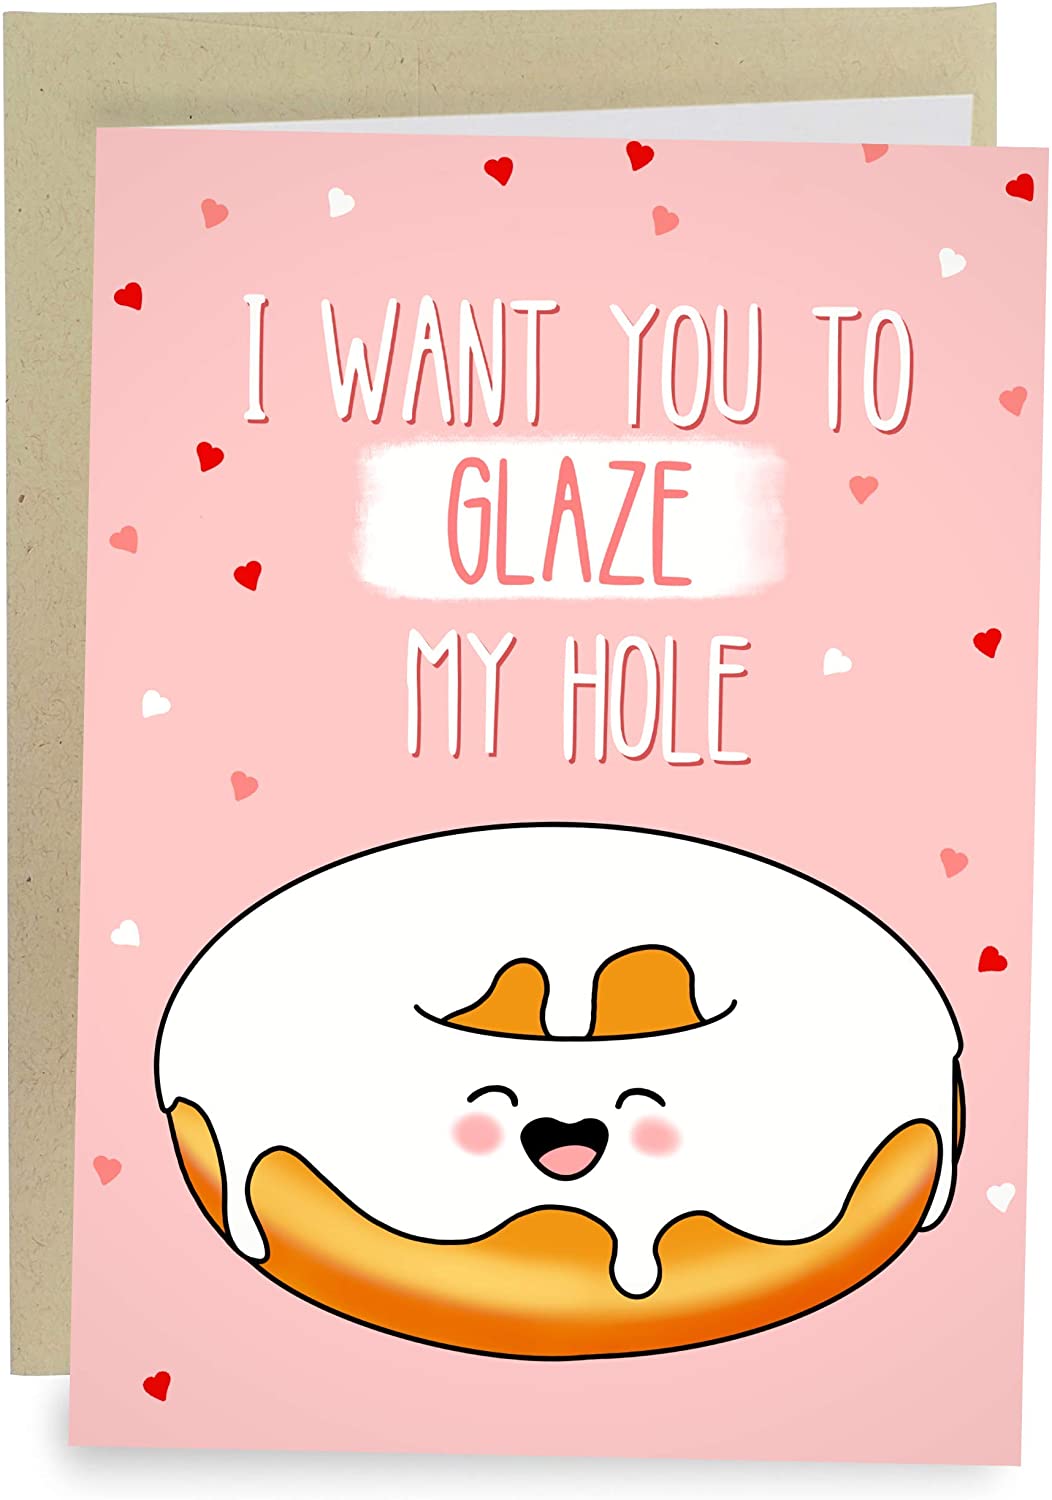 Sleazy Greetings Funny Anniversary Card For Husband | Dirty Birthday Card for Boyfriend Husband Him | Perfect For Valentine's Day | Glaze My Hole Donut Card